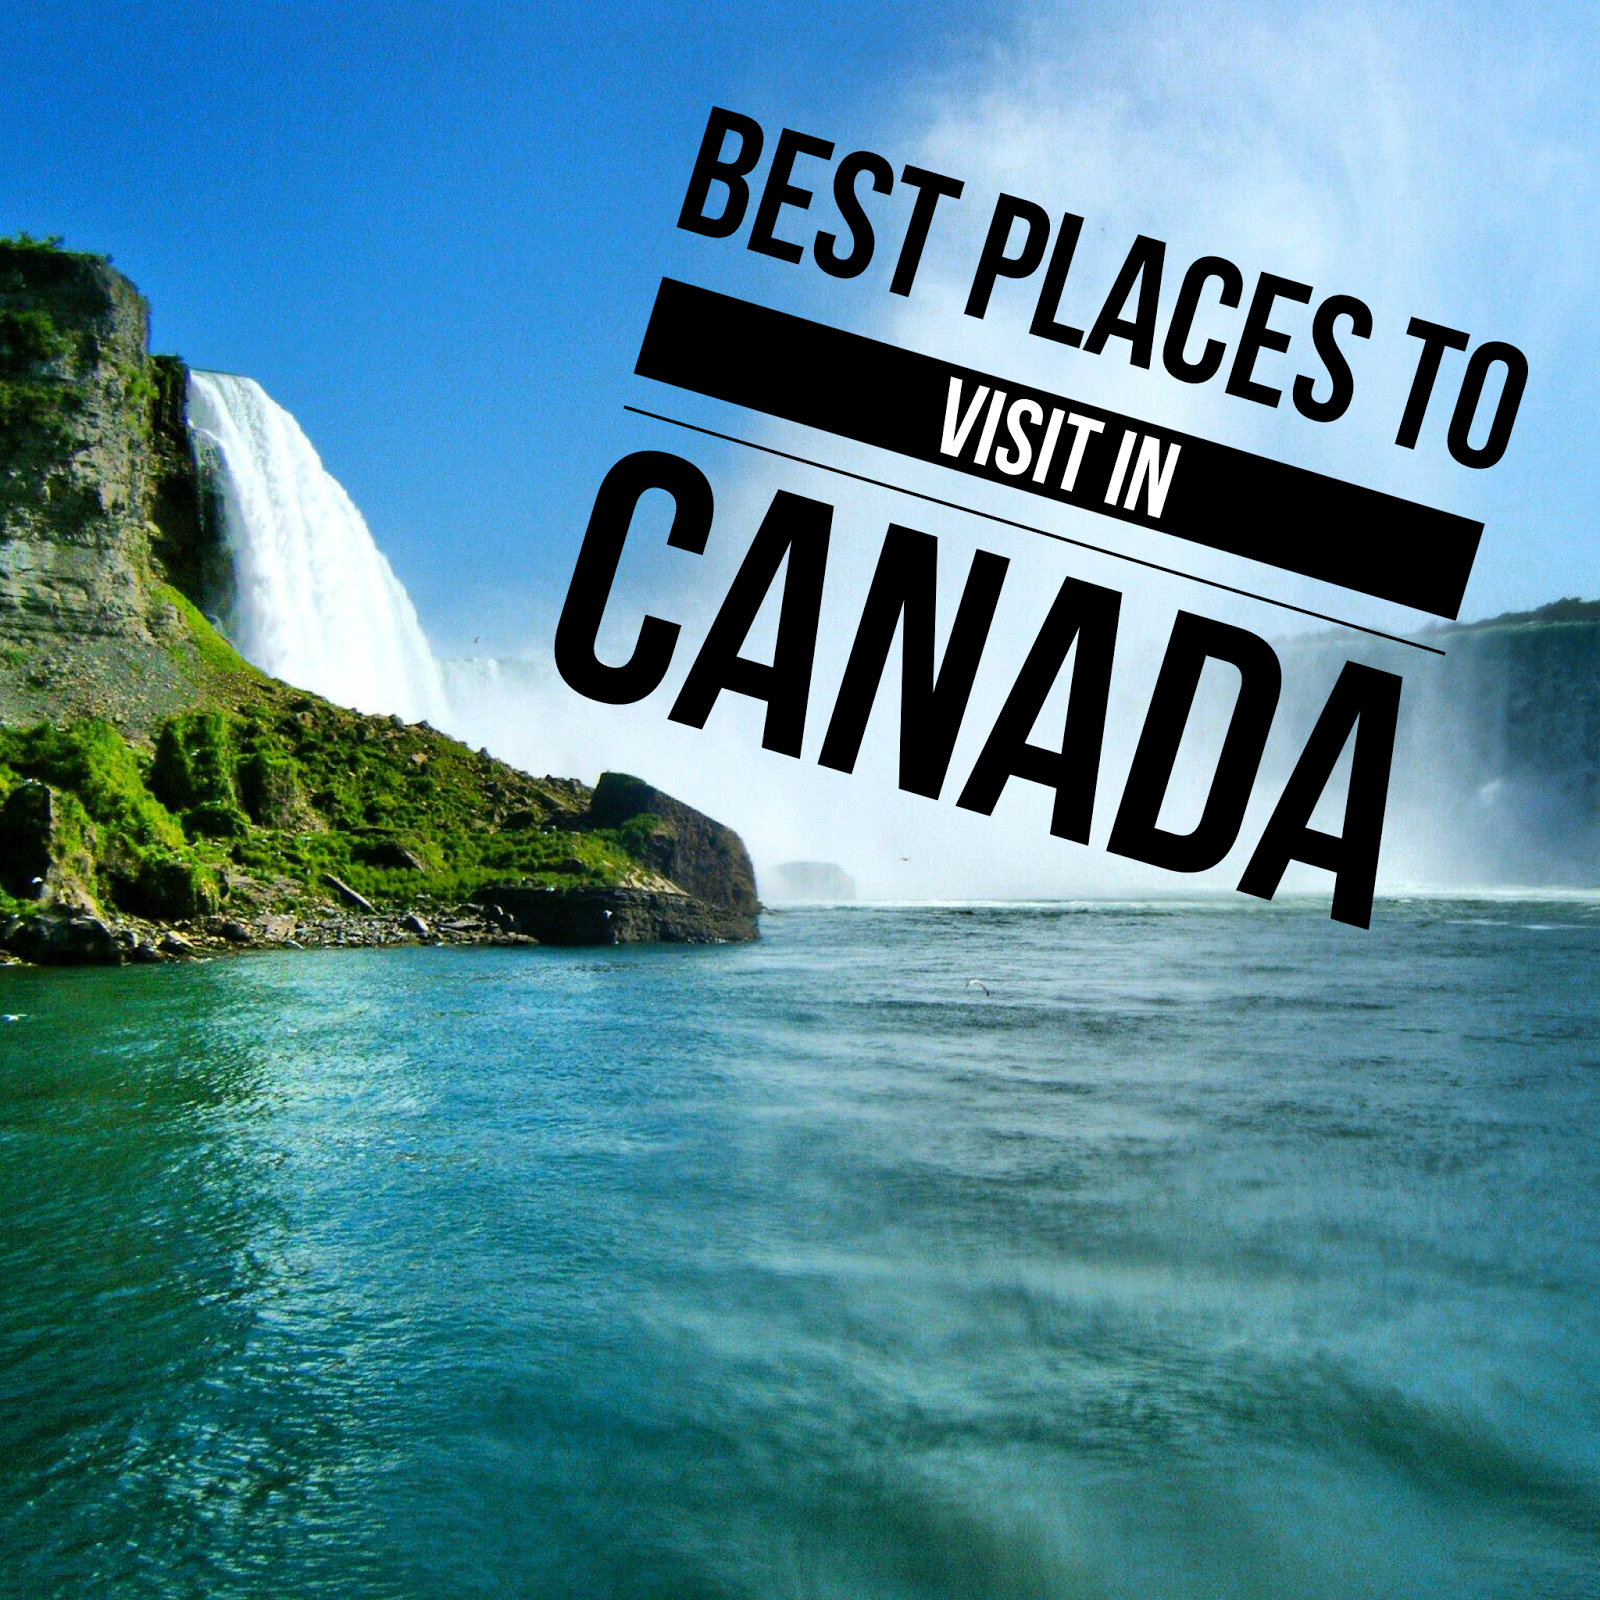 this is that travel guide to canada review